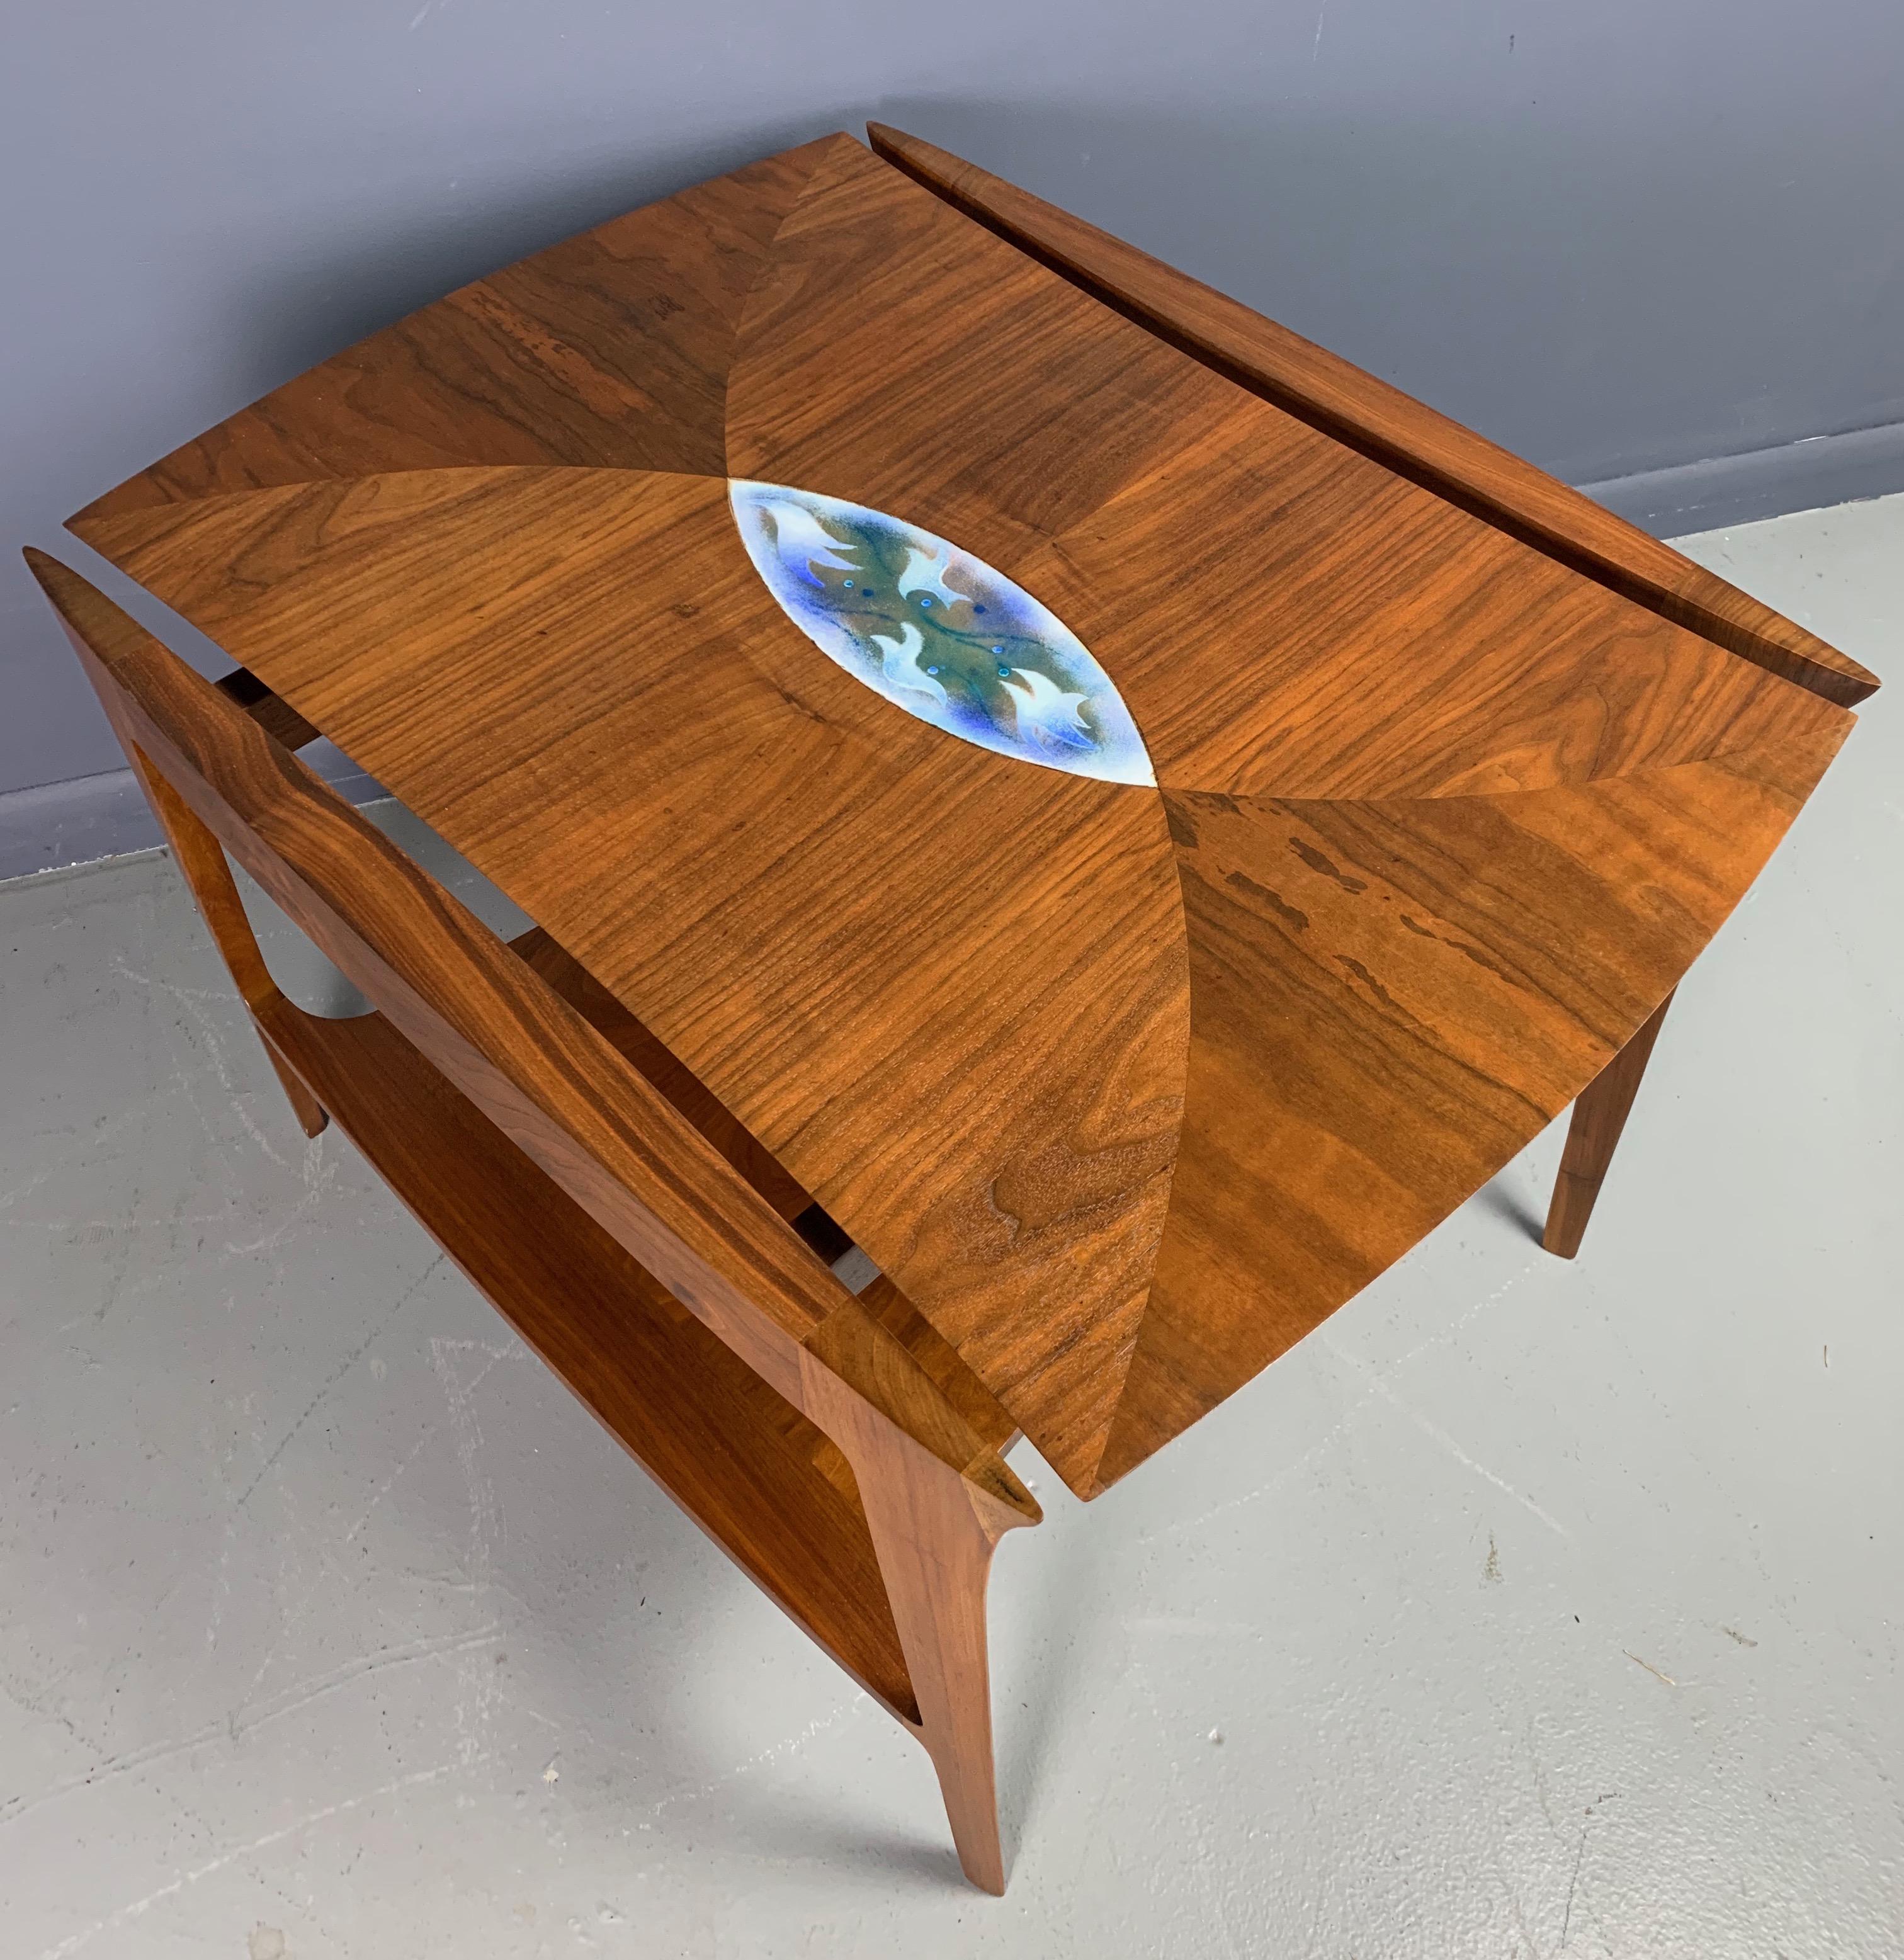 20th Century Danish Midcentury Walnut Sculpted Side Table with Enameled Insert of Birds For Sale